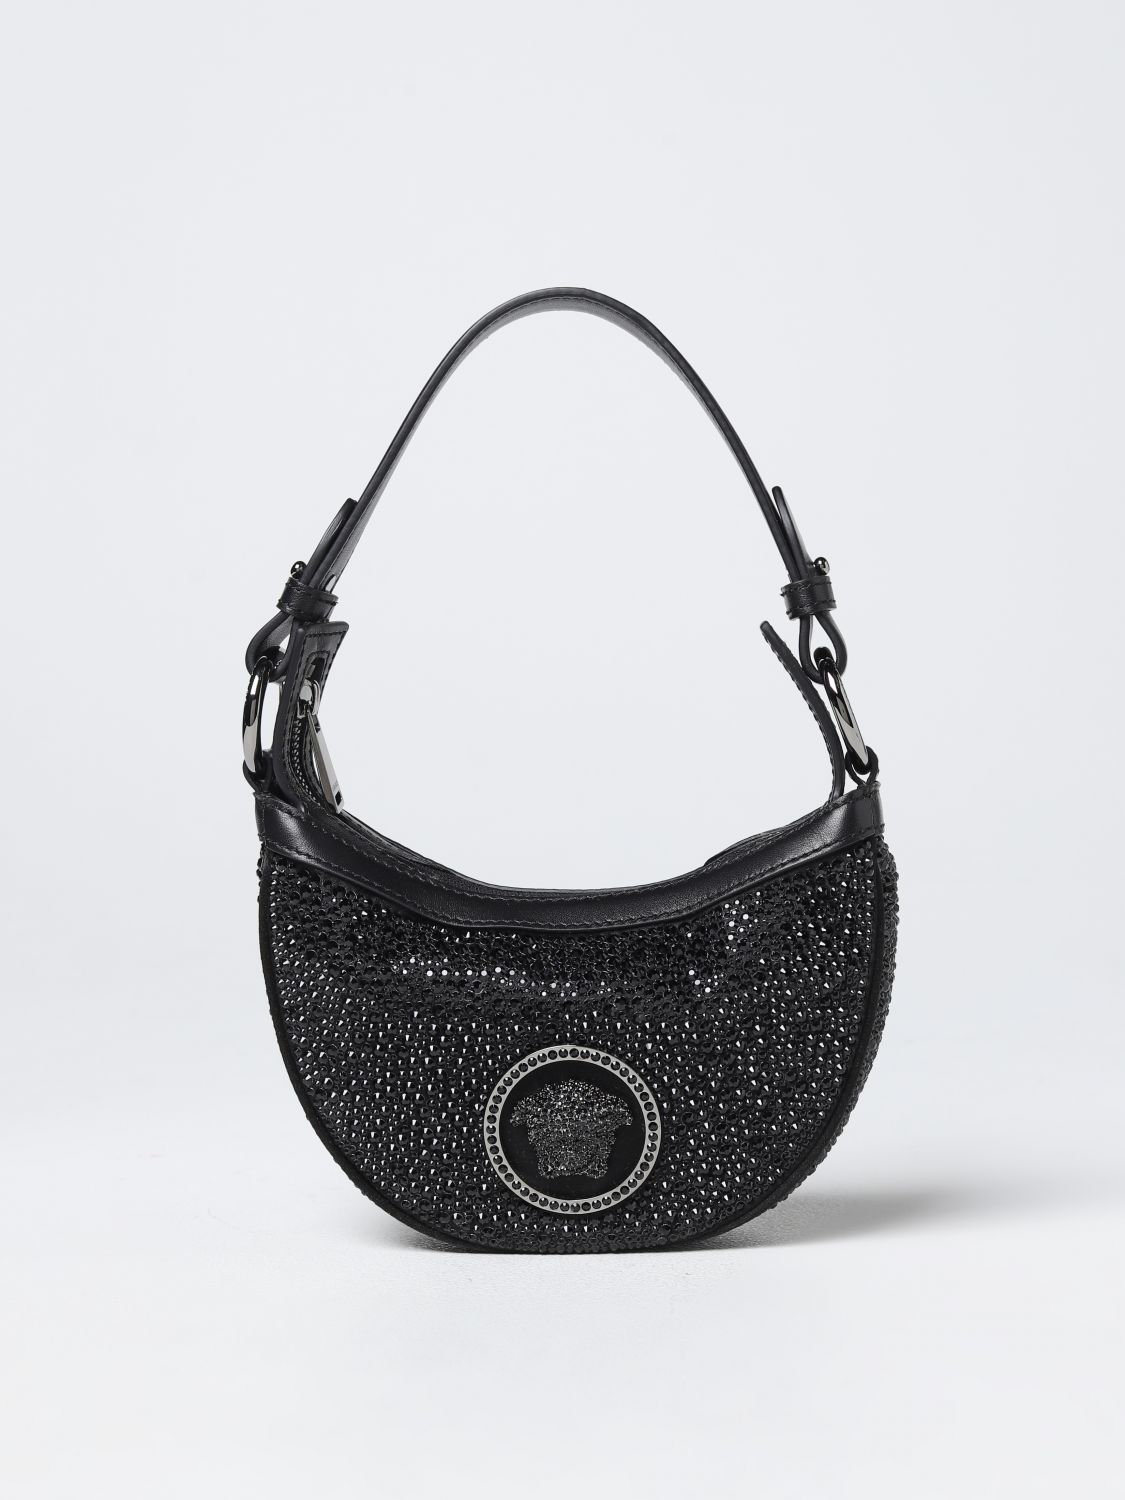 VERSACE MEDUSA VERSACE BAG IN LEATHER WITH RHINESTONES,E08153002